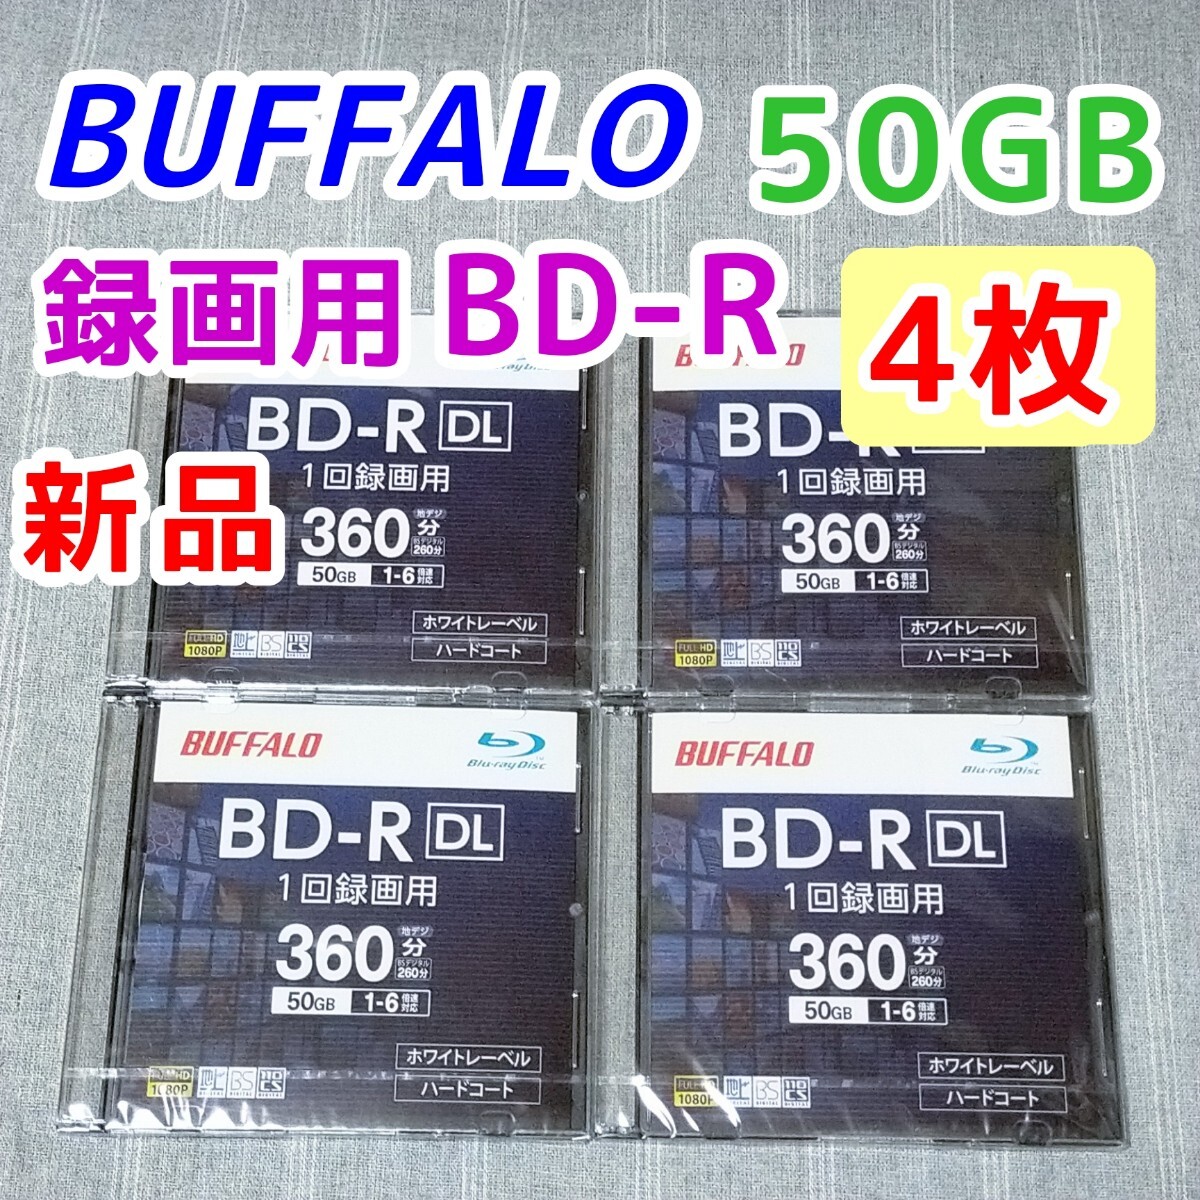 4 sheets *50GB new goods BUFFALO BD-R DL 1 times video recording for Blu-ray Blue-ray recorder Buffalo BRAVIA correspondence BD-RE 6 speed deck 25GB